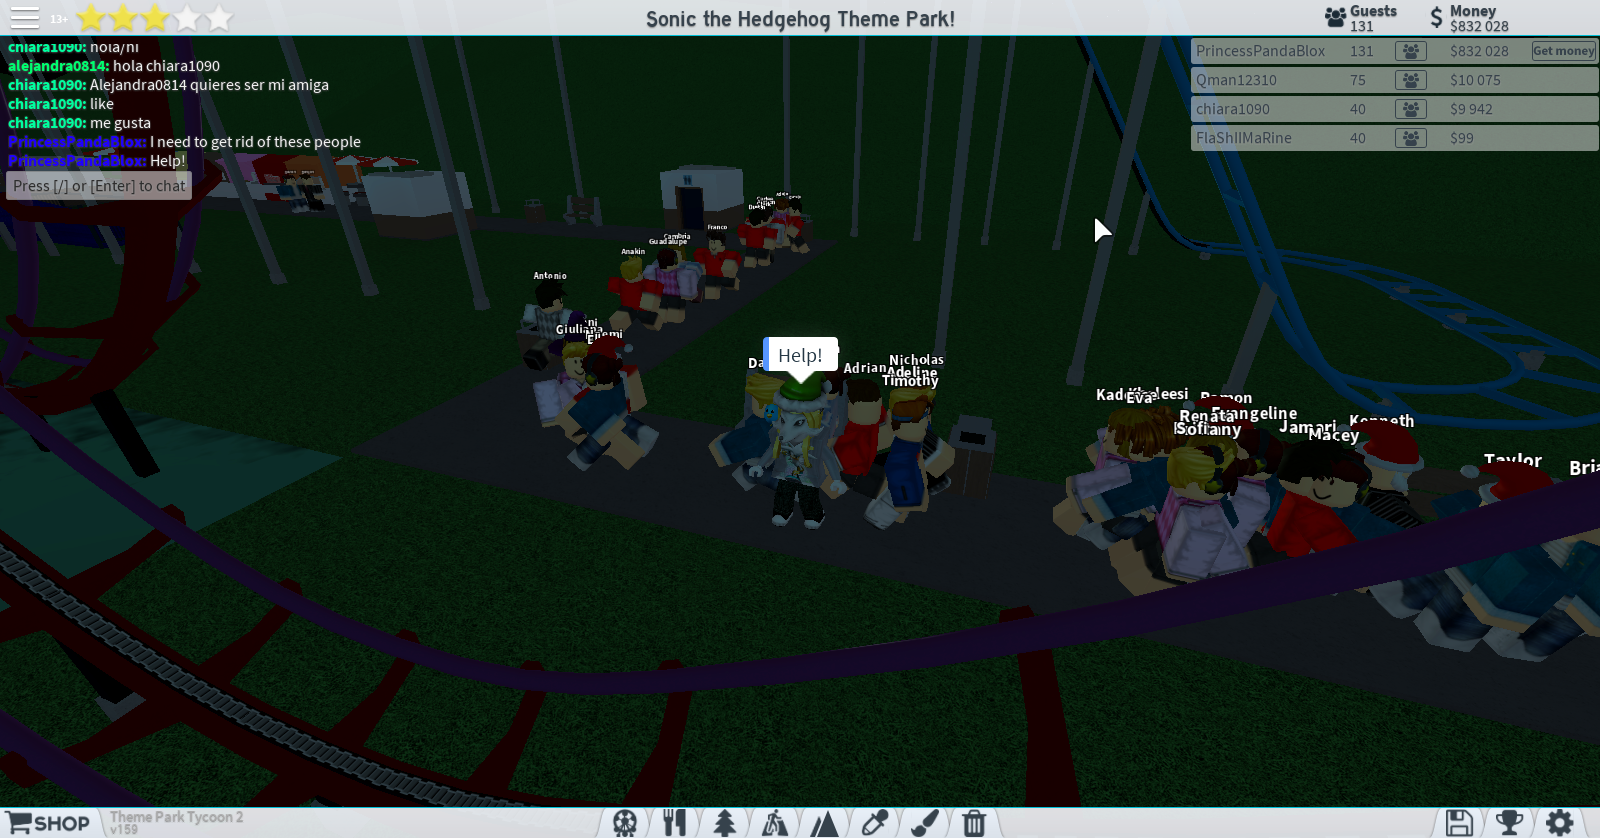 How Do I Get Rid Of These People Theme Park Tycoon 2 - how to get rid of chat in game in roblox